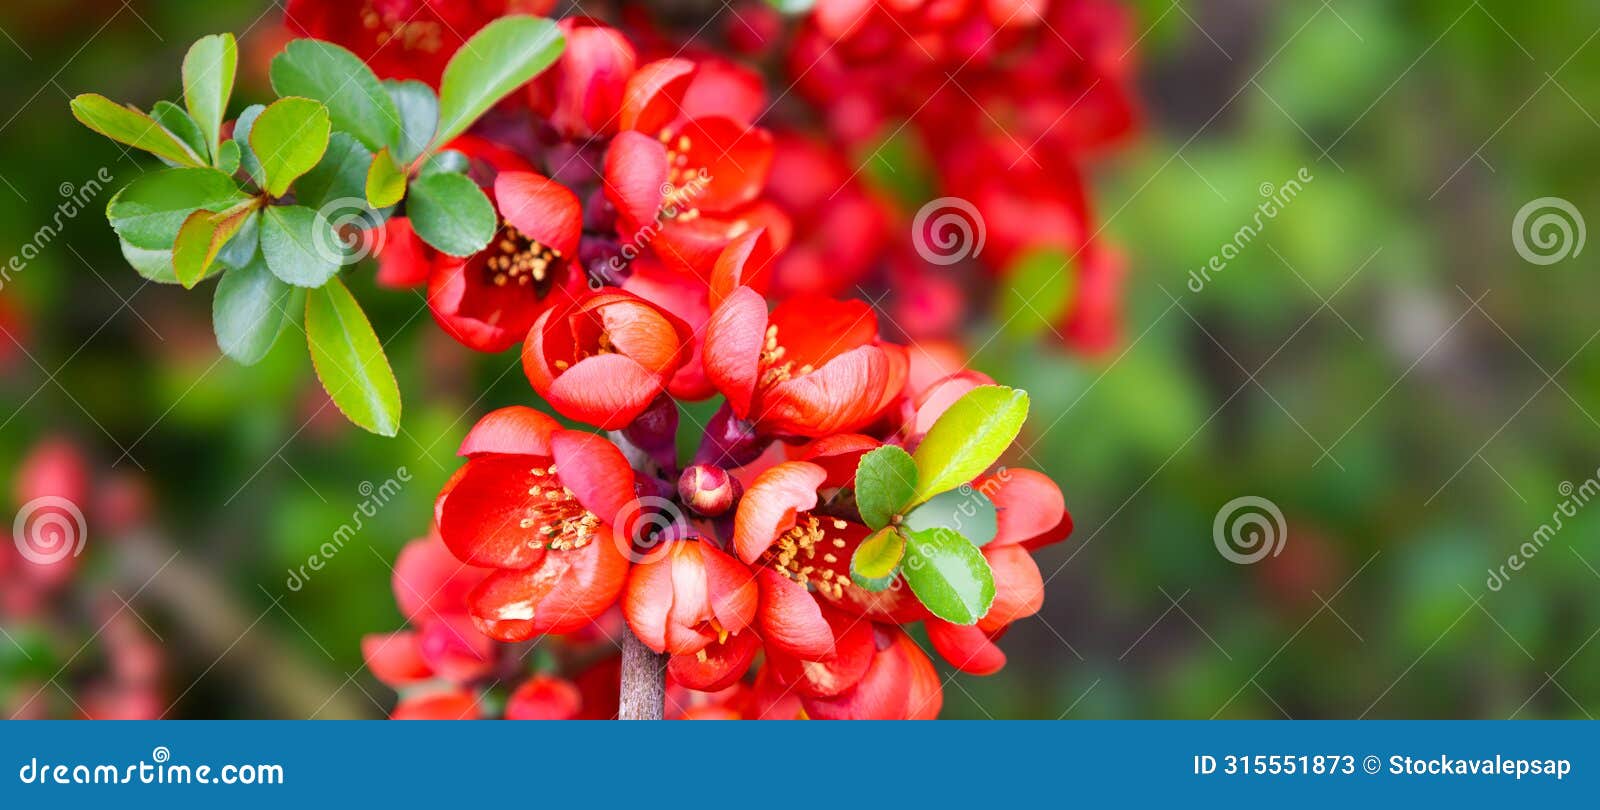 blossom of bright japanese quince in spring. red flowers of maule's quince. chaenomeles japonica from the rosaceae